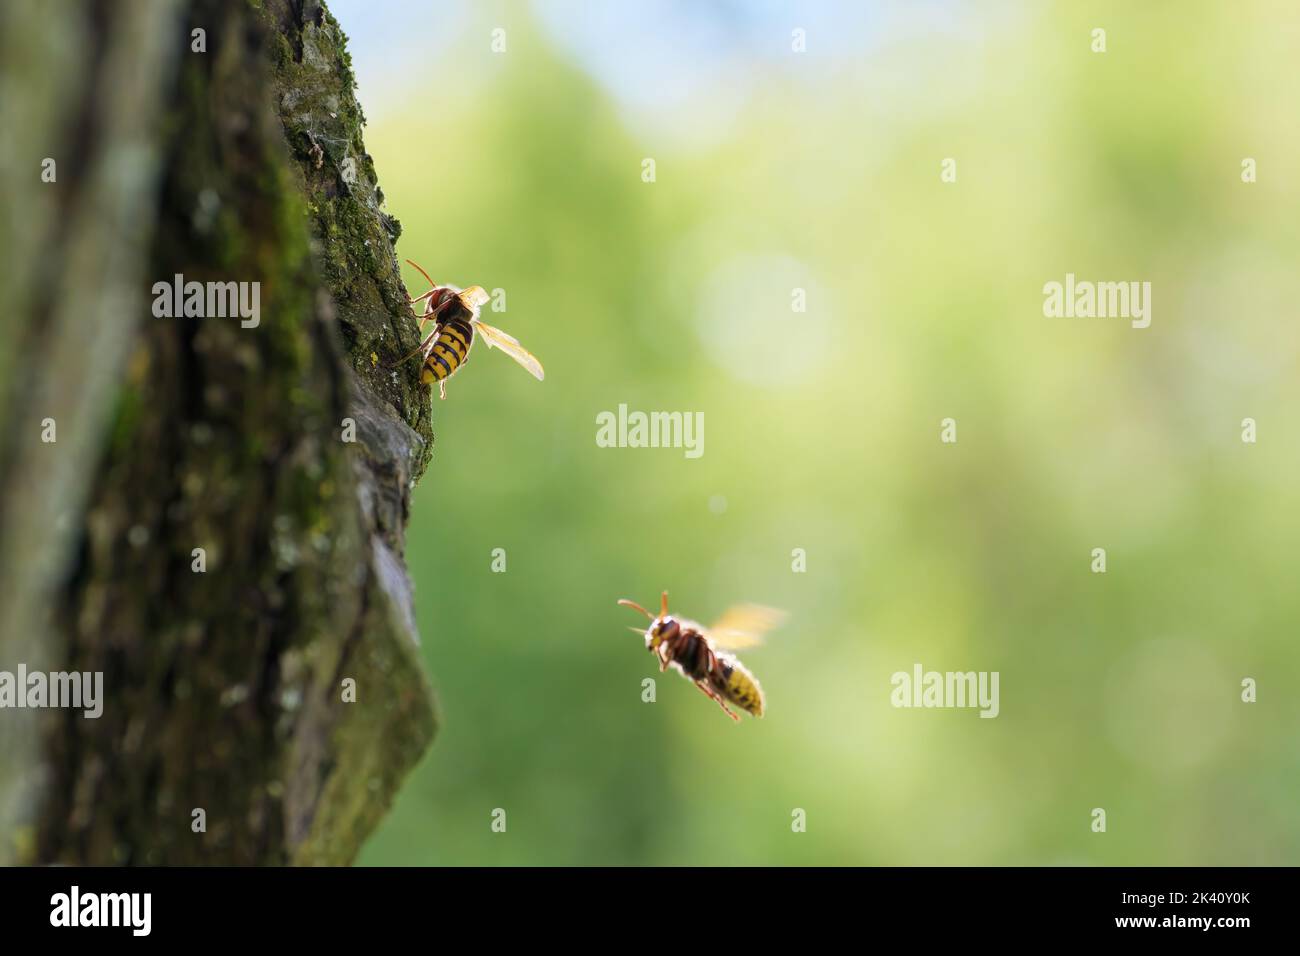 Hornets on apple tree trunk in the countryside. Entomology, insects Stock Photo